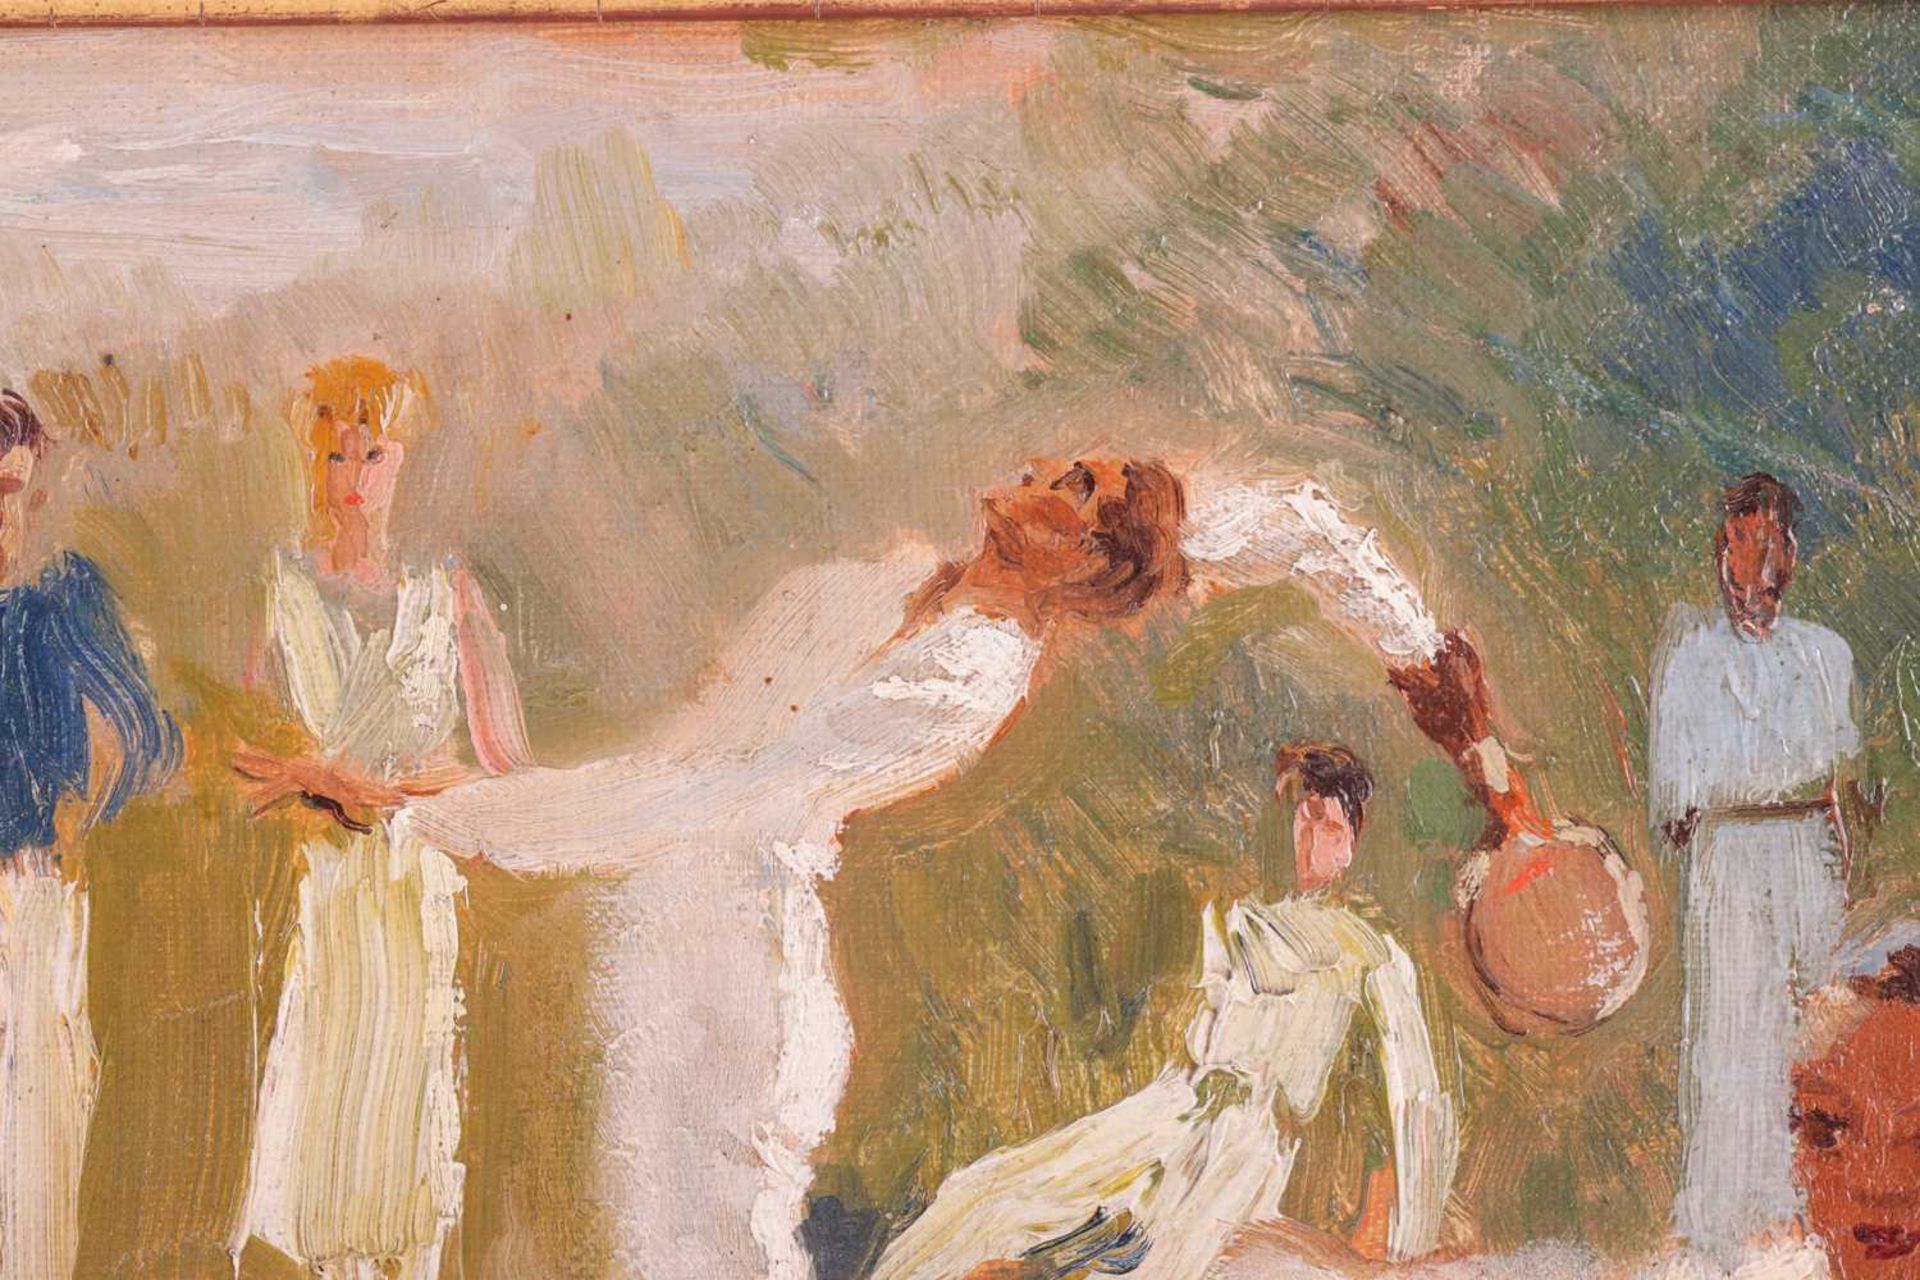 European School (Early 20th Century), The Doubles Tennis Match, unsigned, oil on canvas, 27 x 38 cm, - Image 4 of 6